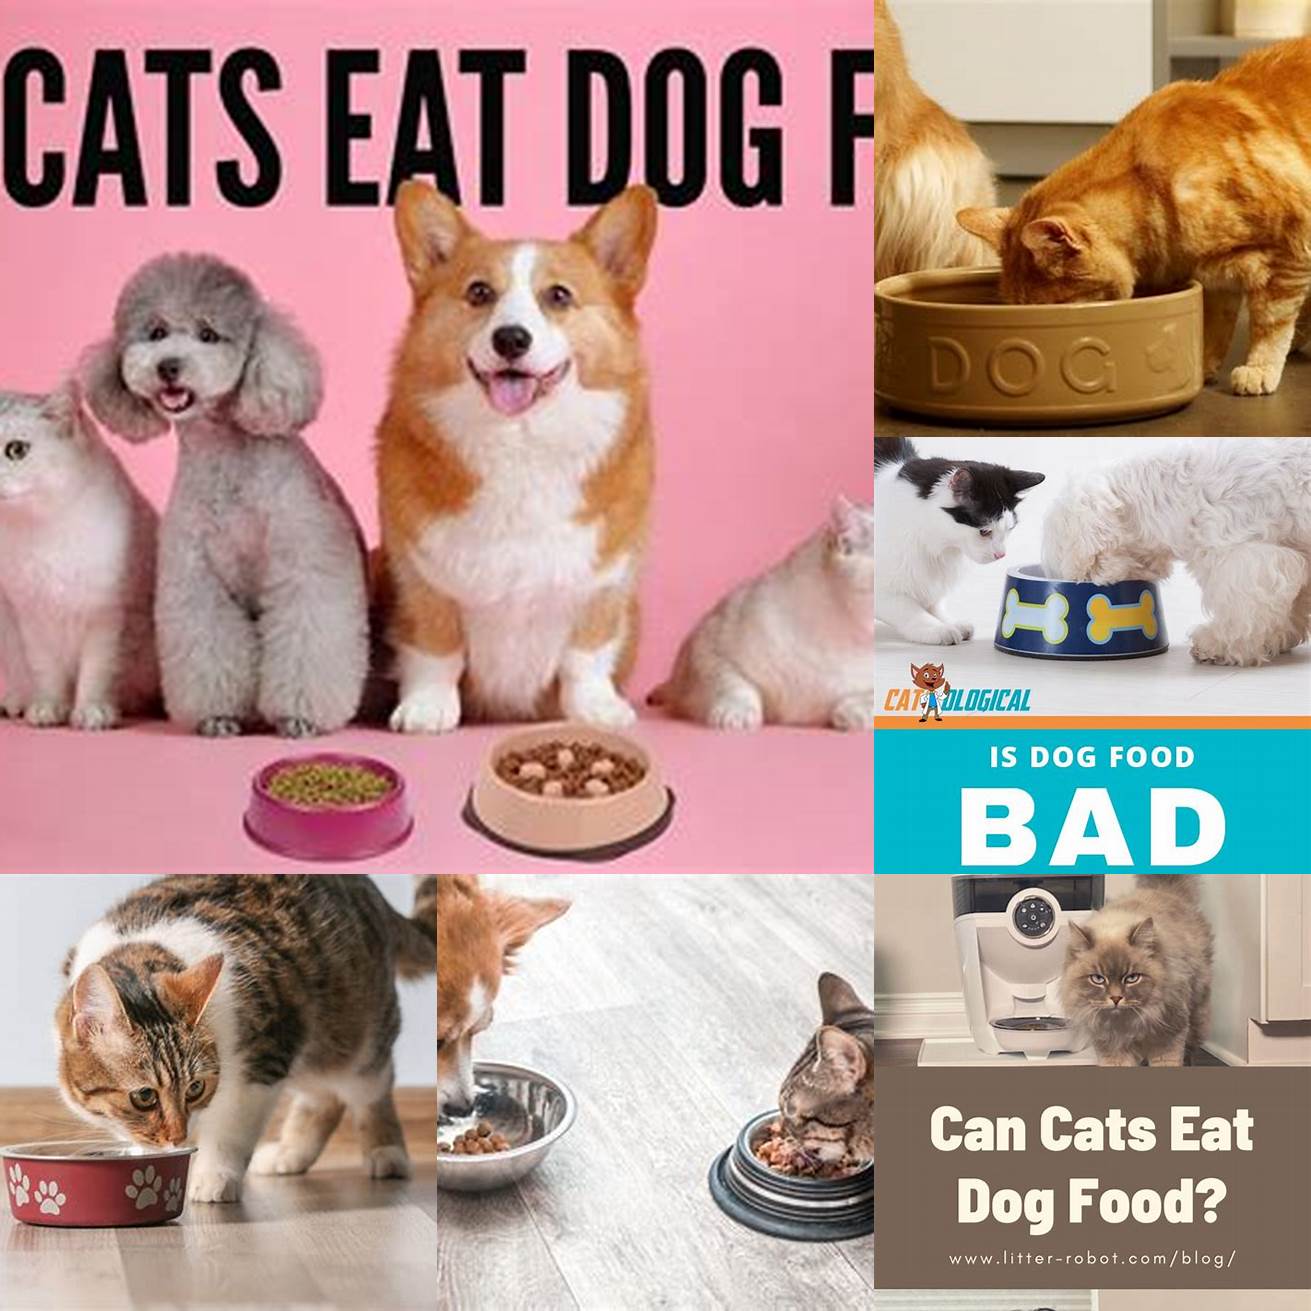 Q Can cats eat dog food